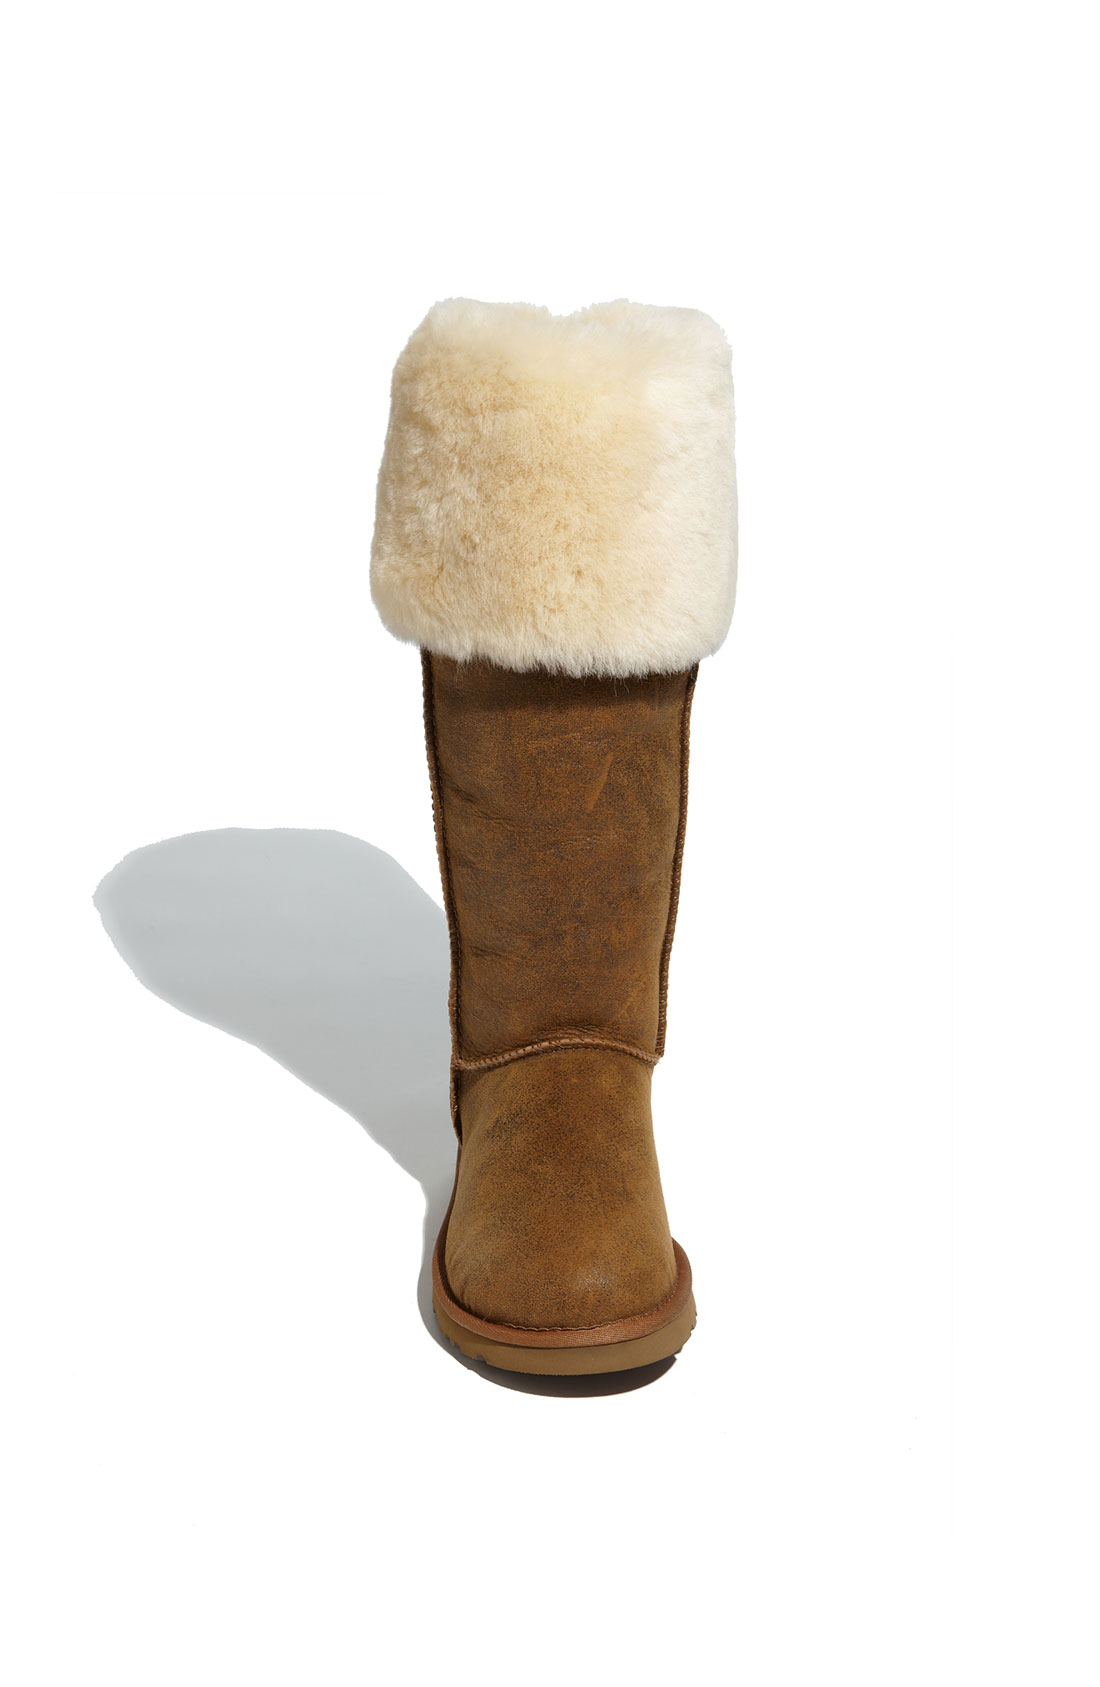 Ugg Over The Knee Bailey Button Boots in Brown (chestnut) | Lyst